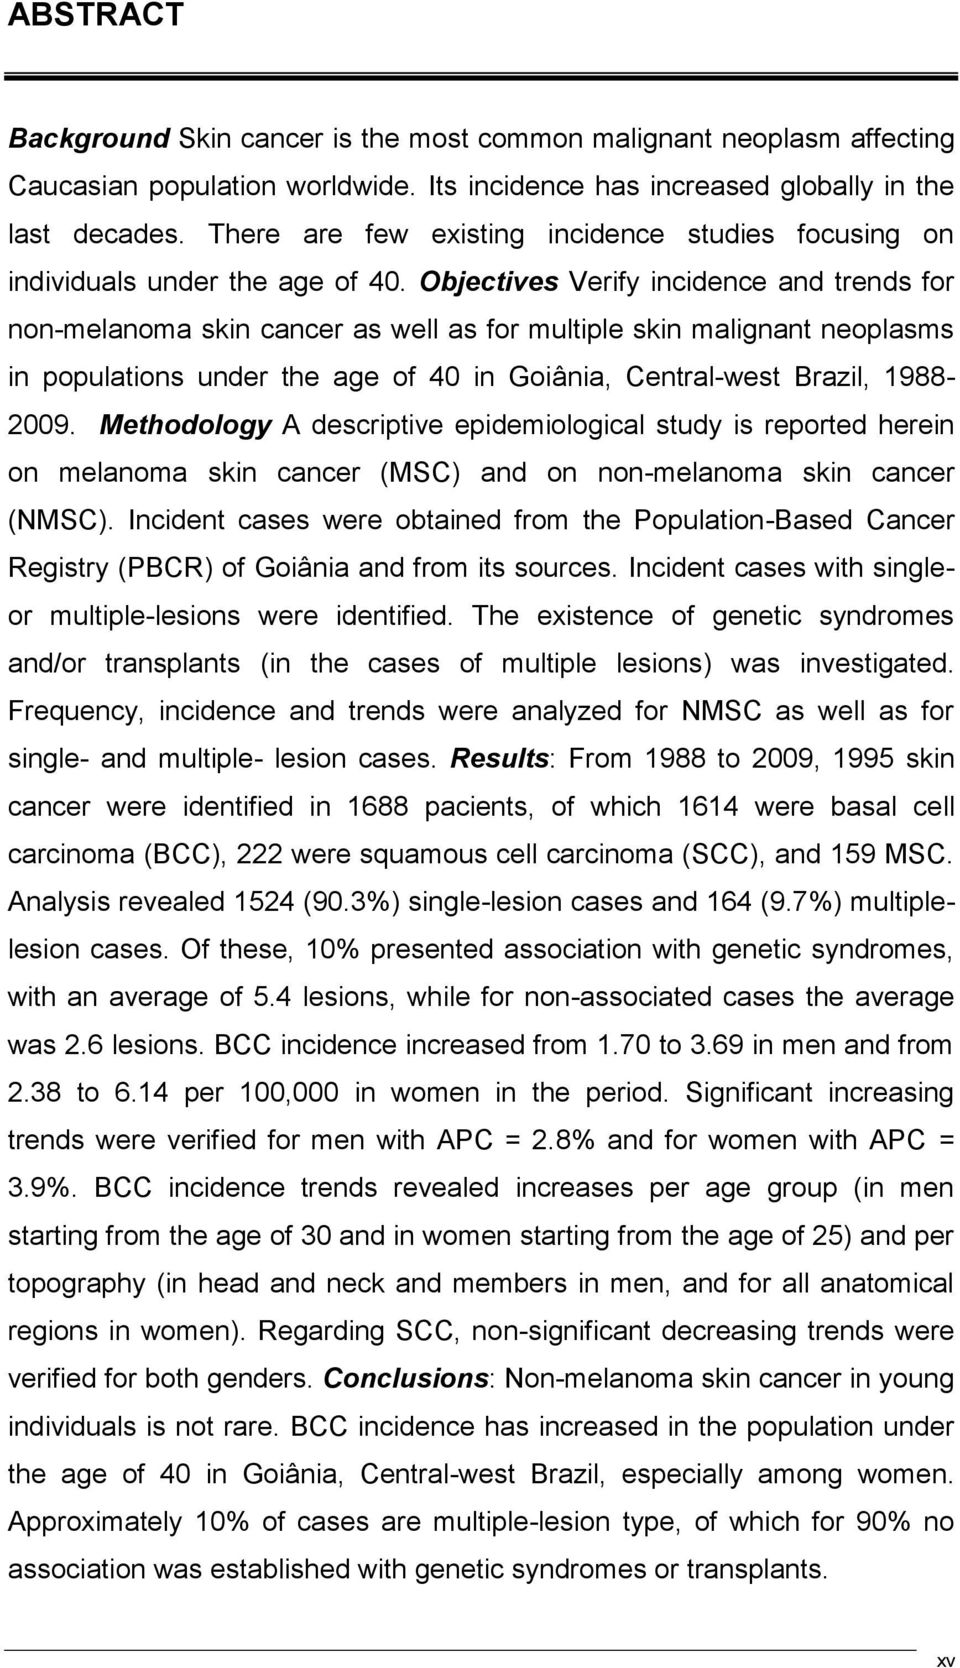 Objectives Verify incidence and trends for non-melanoma skin cancer as well as for multiple skin malignant neoplasms in populations under the age of 40 in Goiânia, Central-west Brazil, 1988-2009.